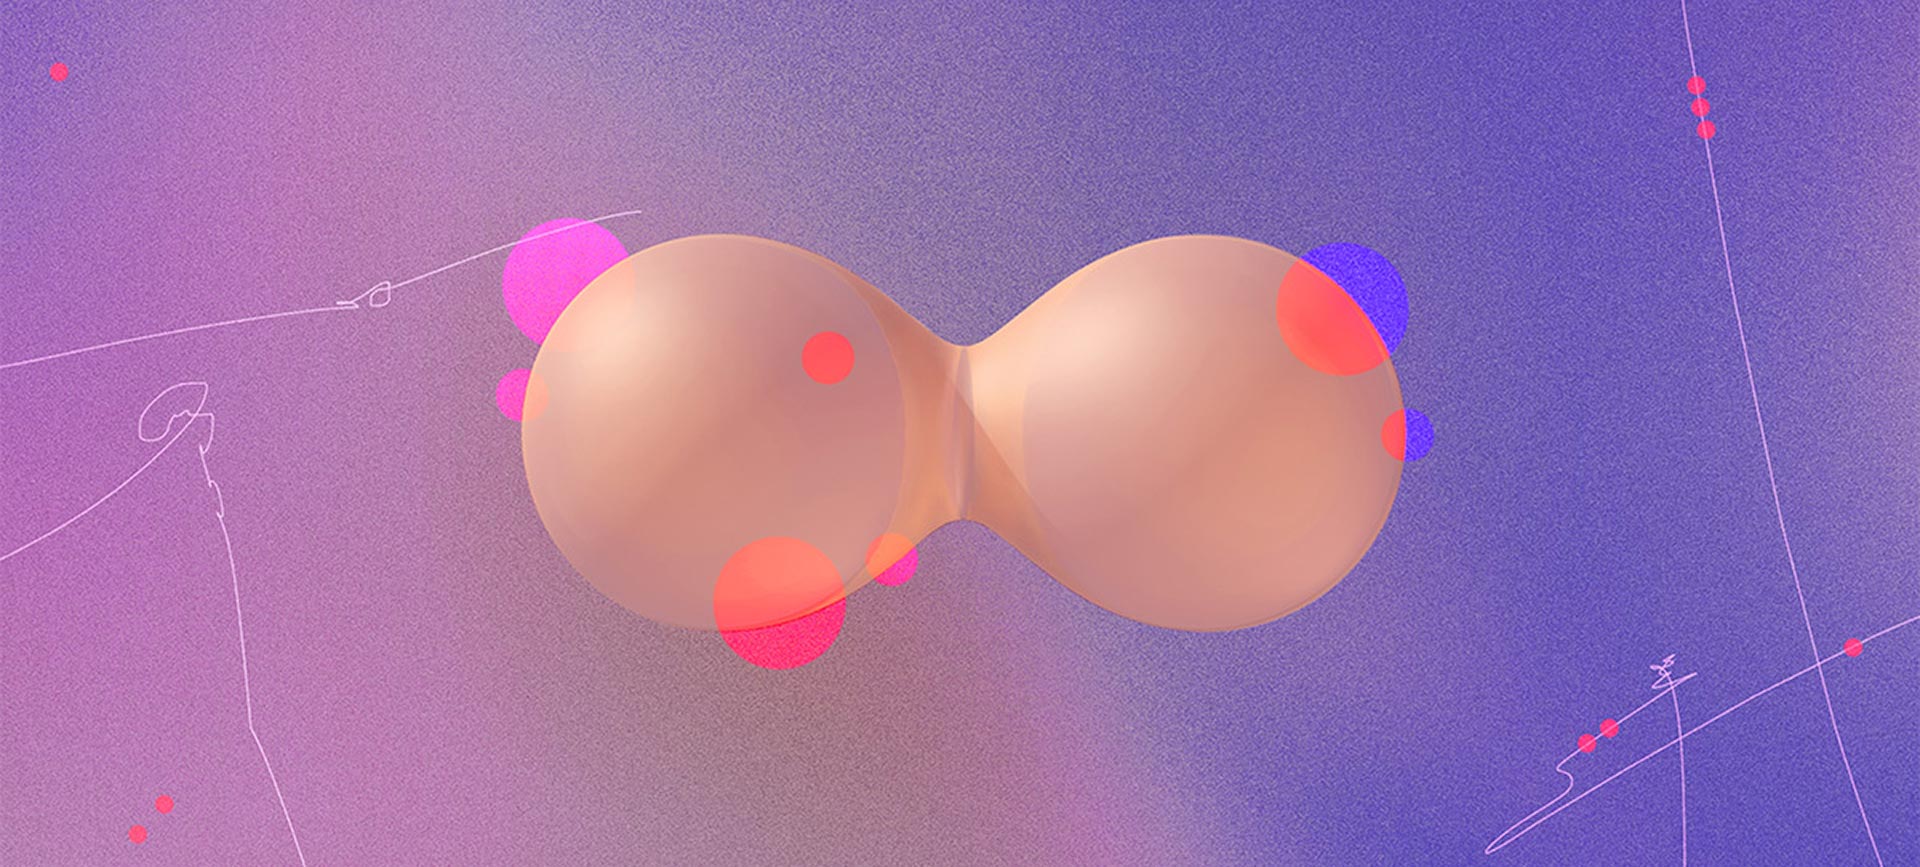 two pink orbs with bright red dots on a pink and purple marbled background